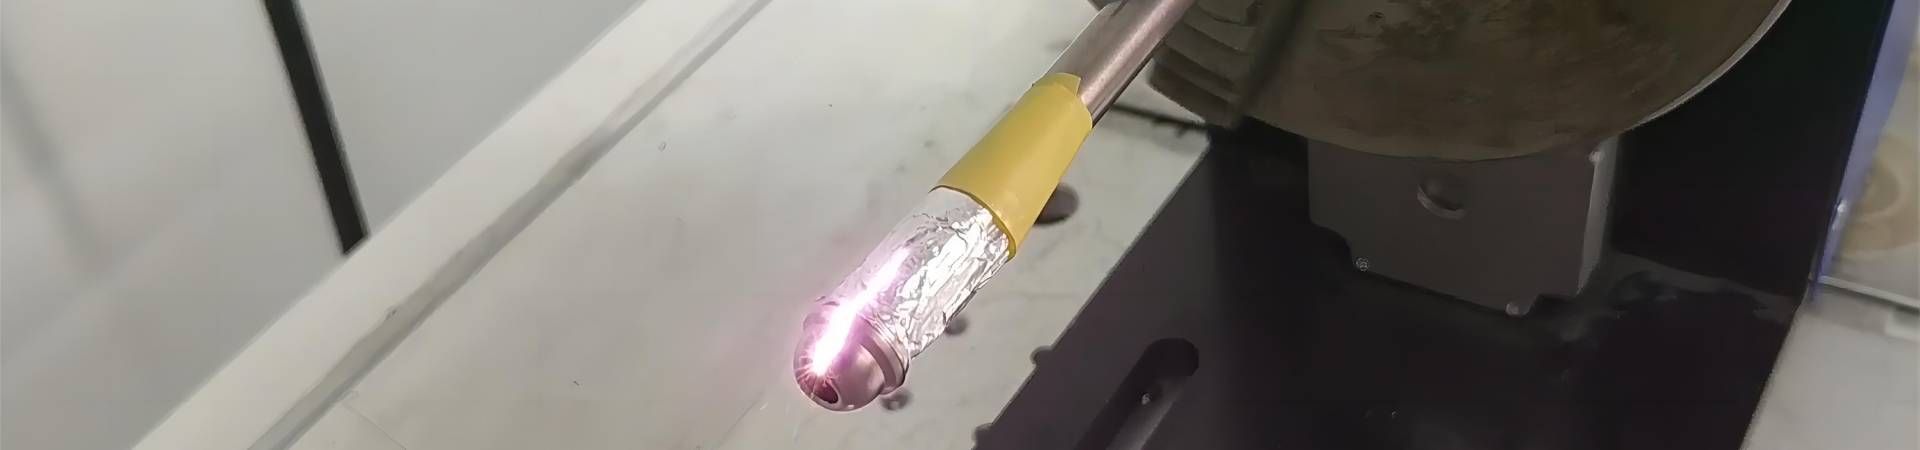 laser cleaning engine nozzle